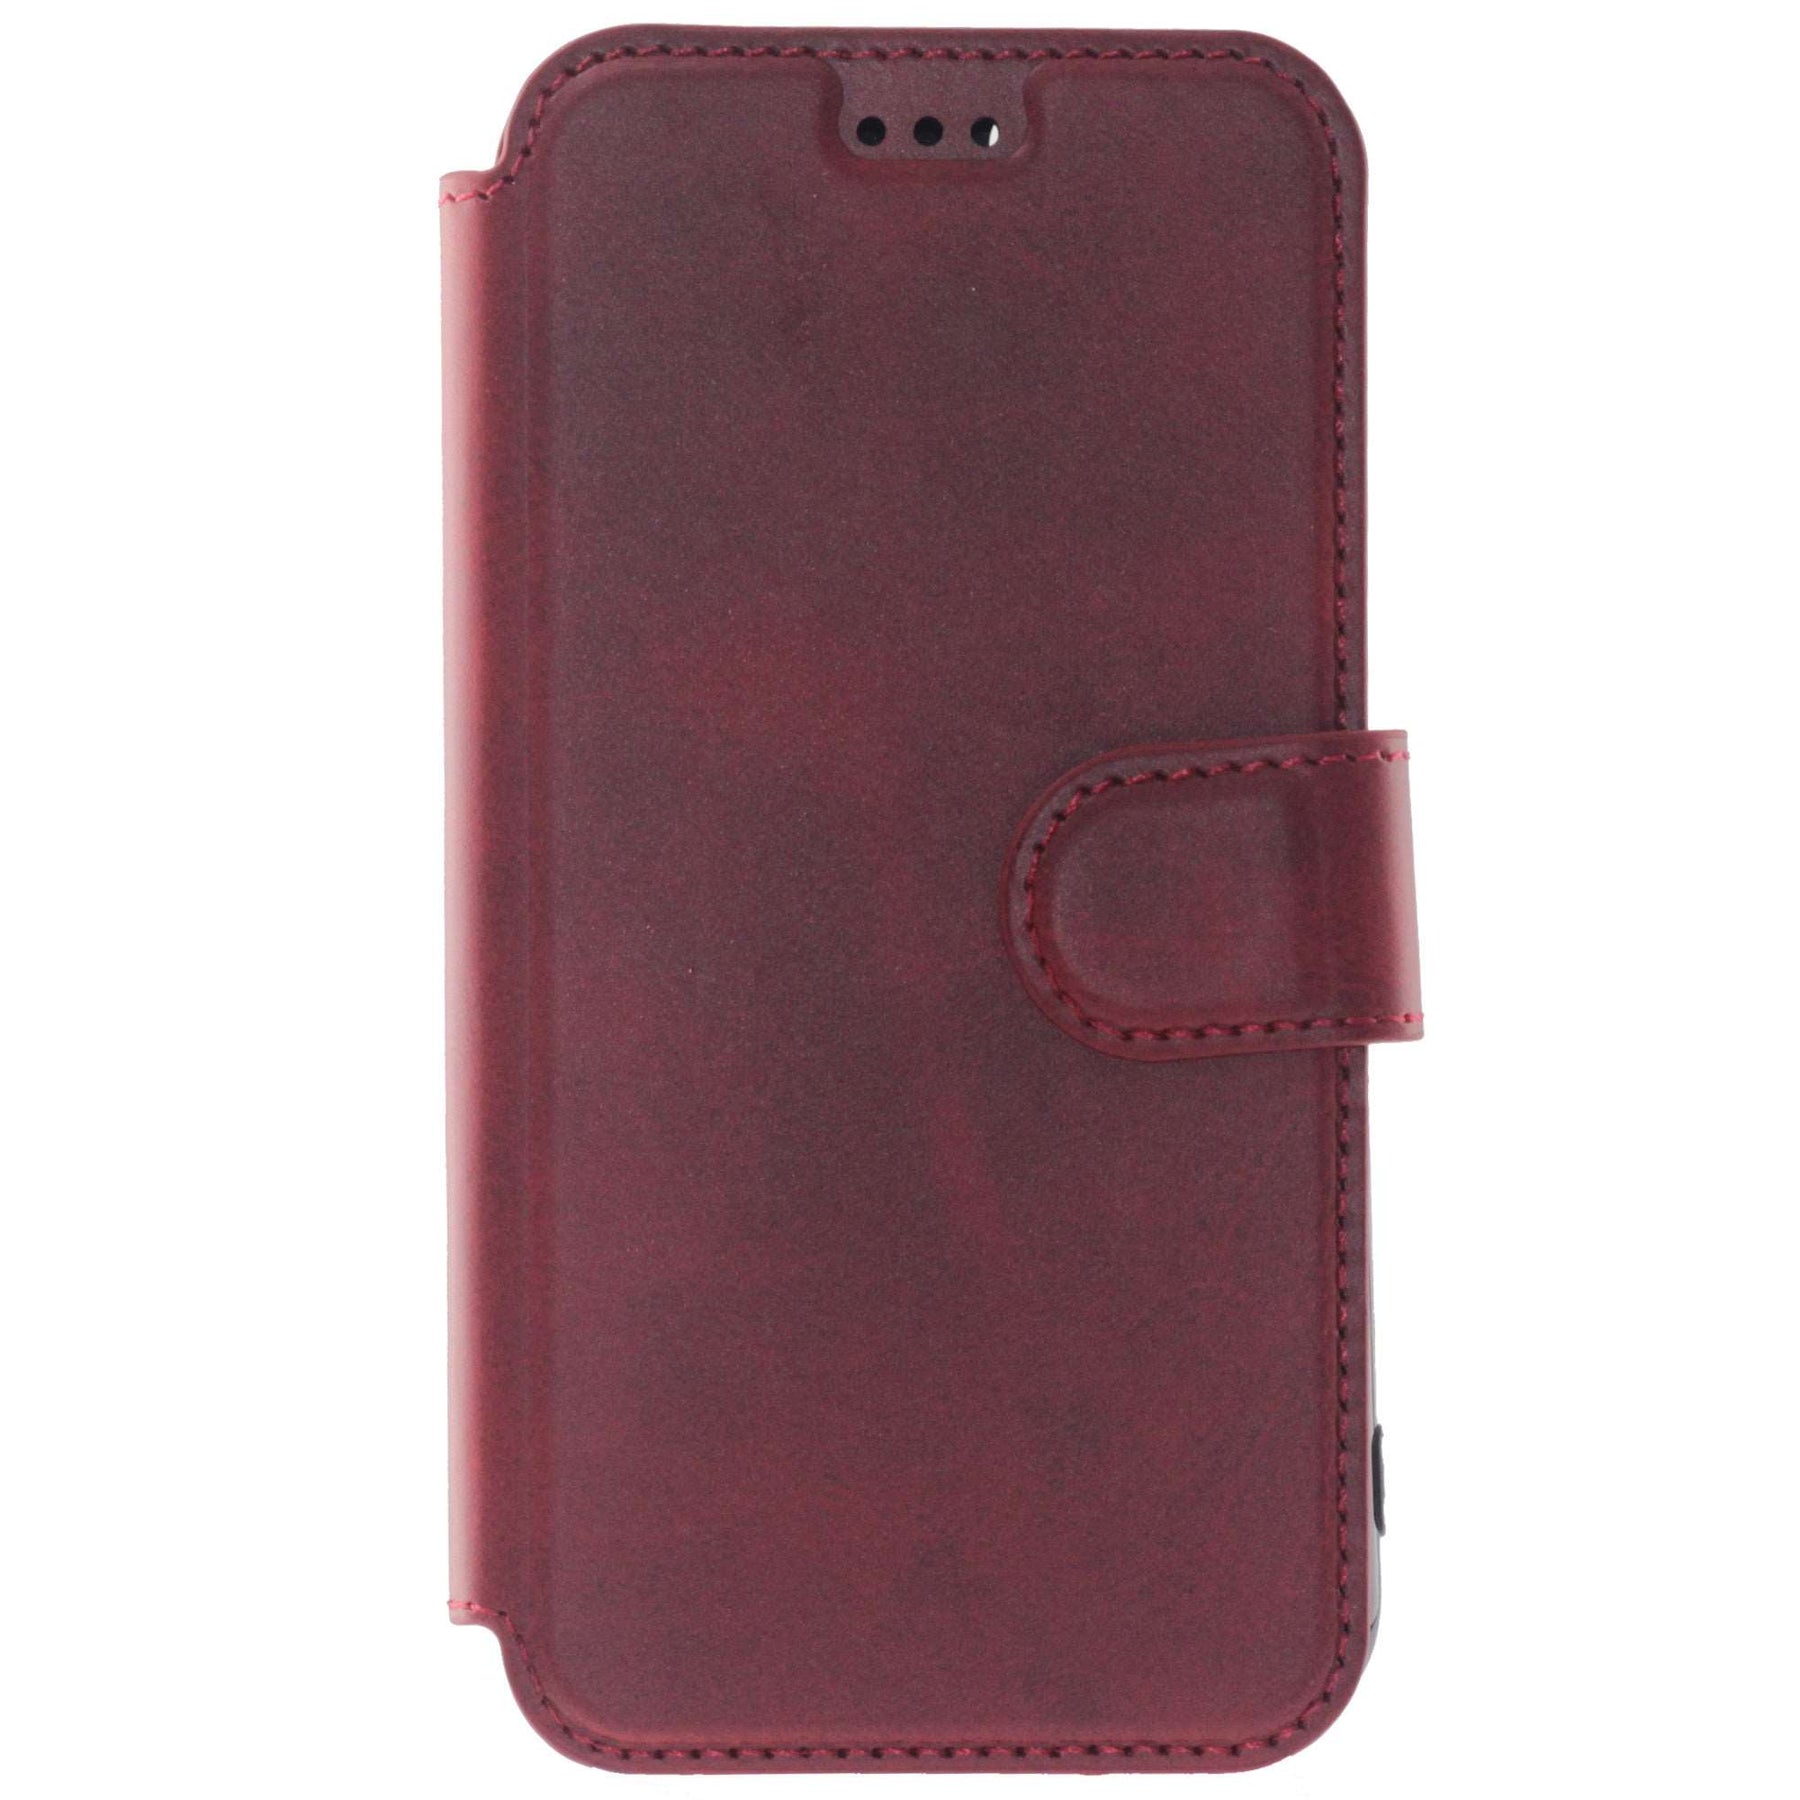 iPhone 6/6s color red wallet case